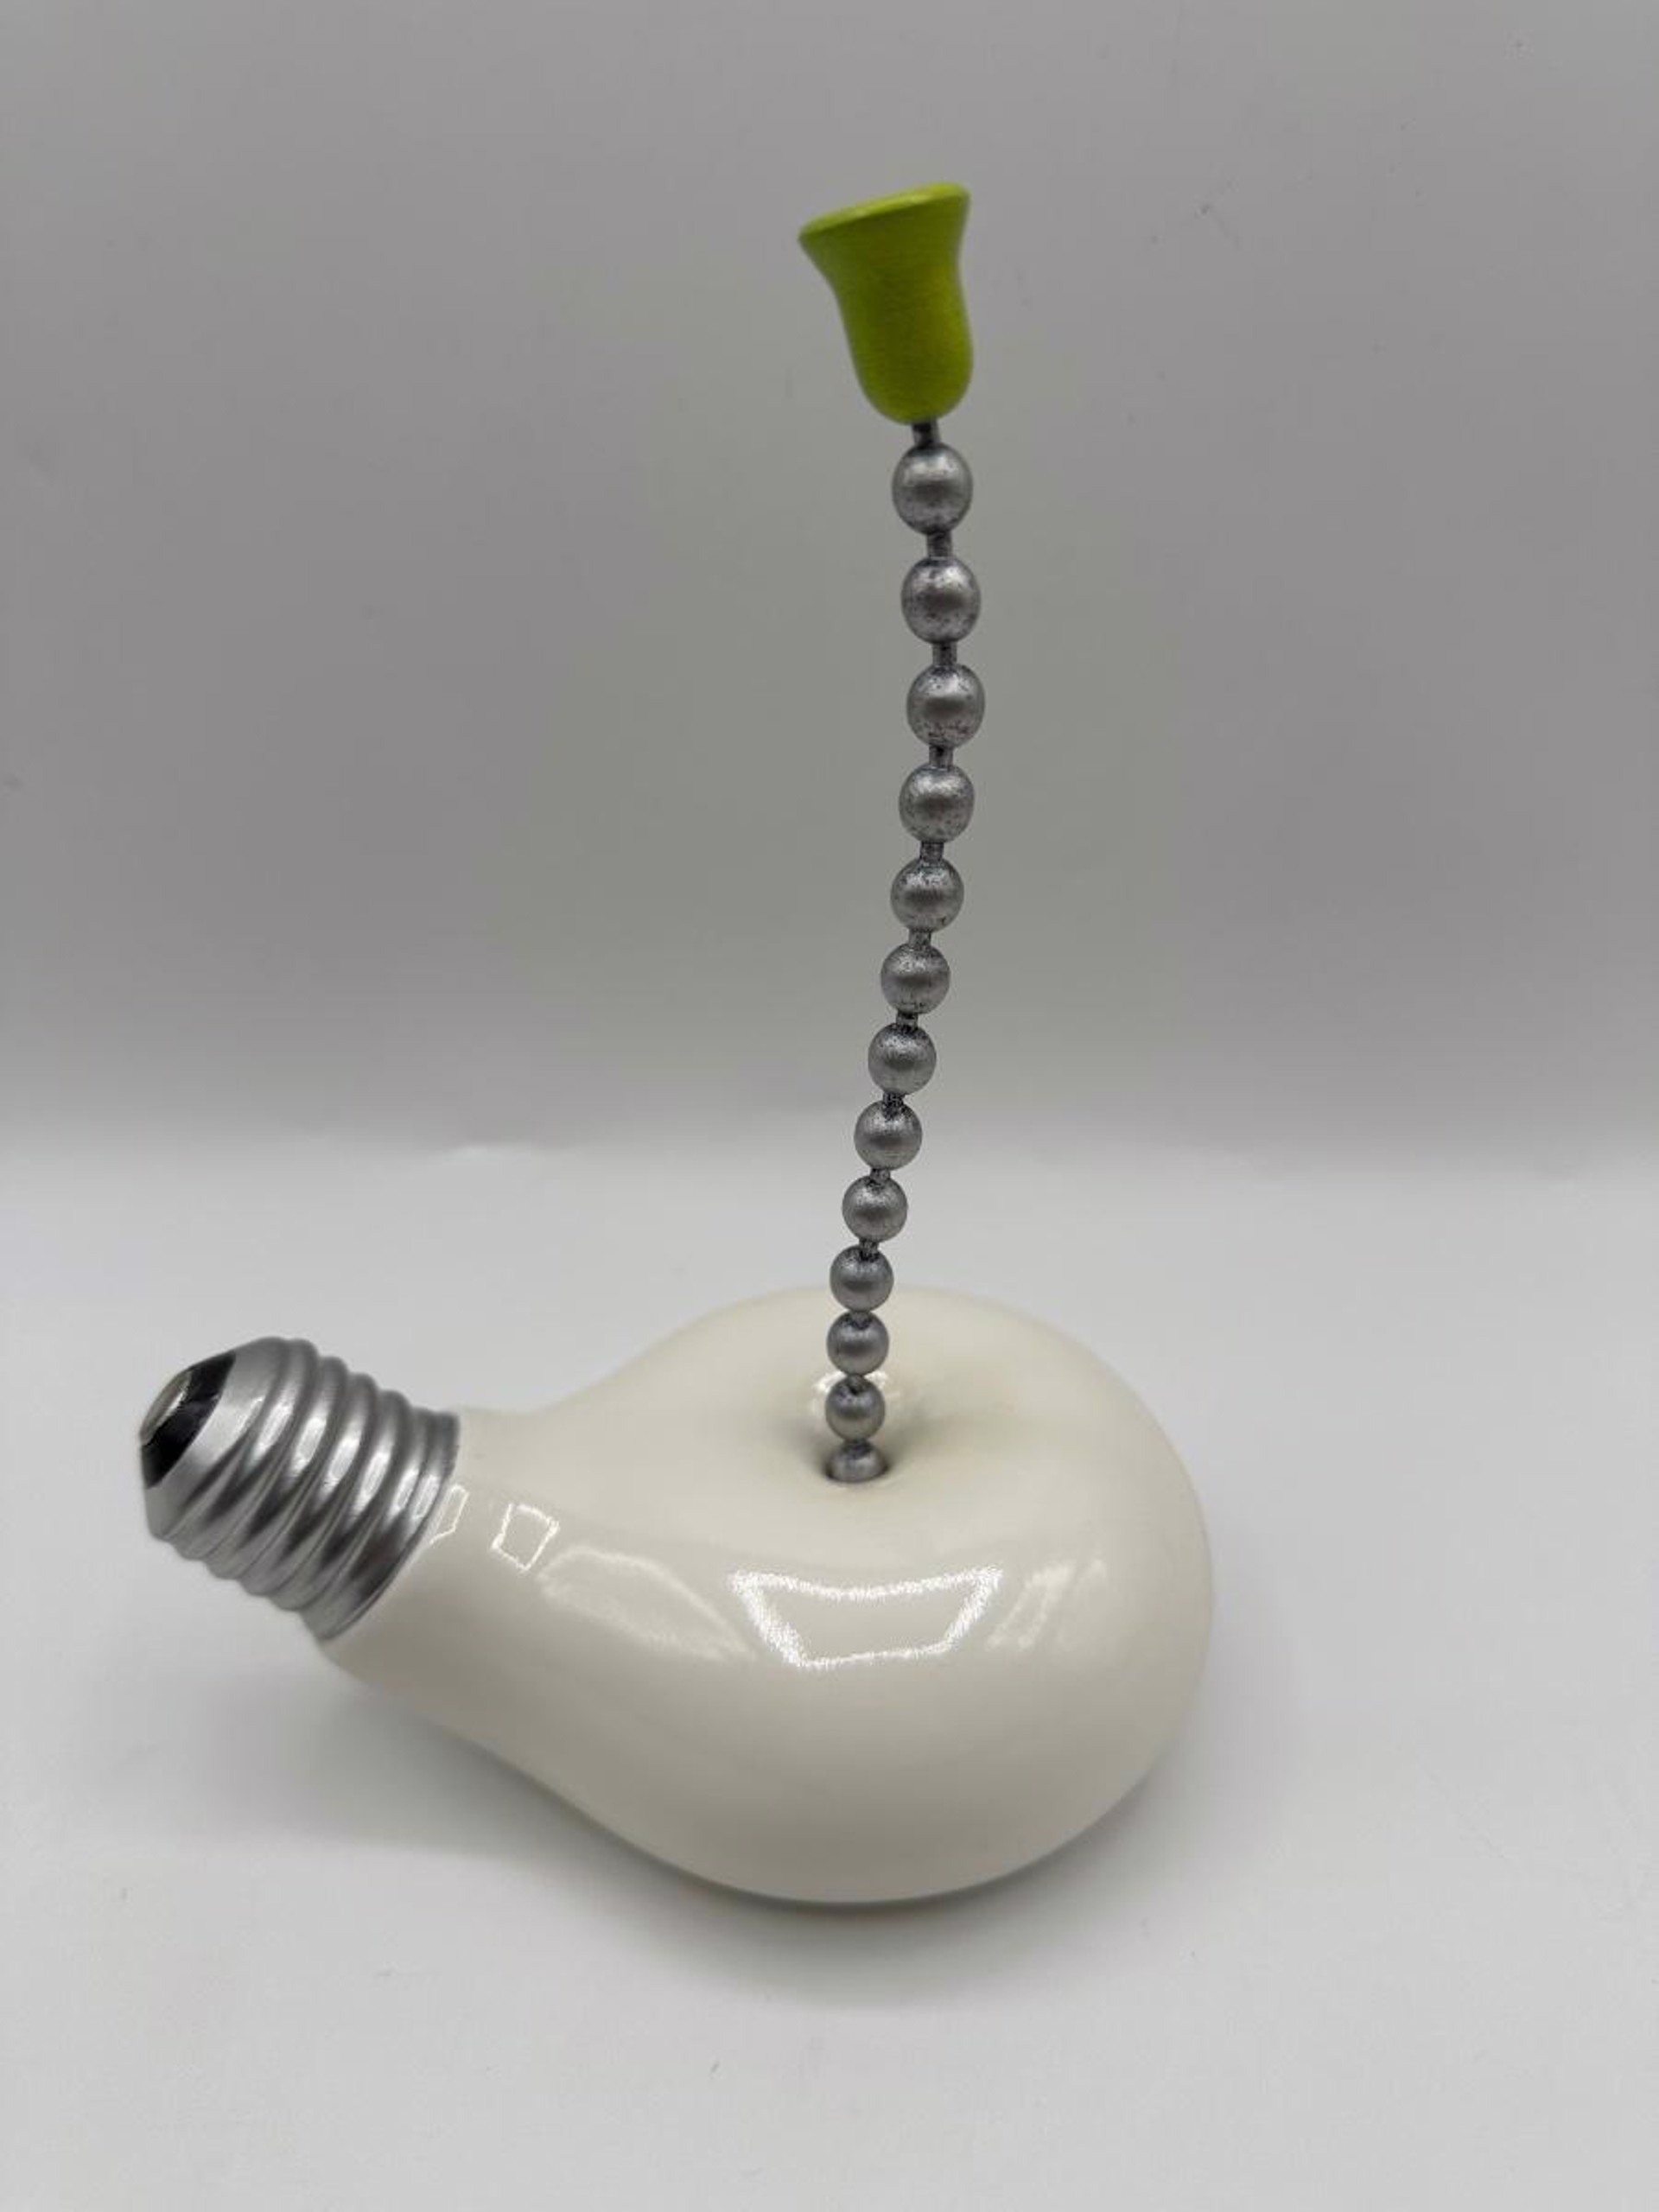 Brite Idea: Light Where You Need It by Sean O'Meallie